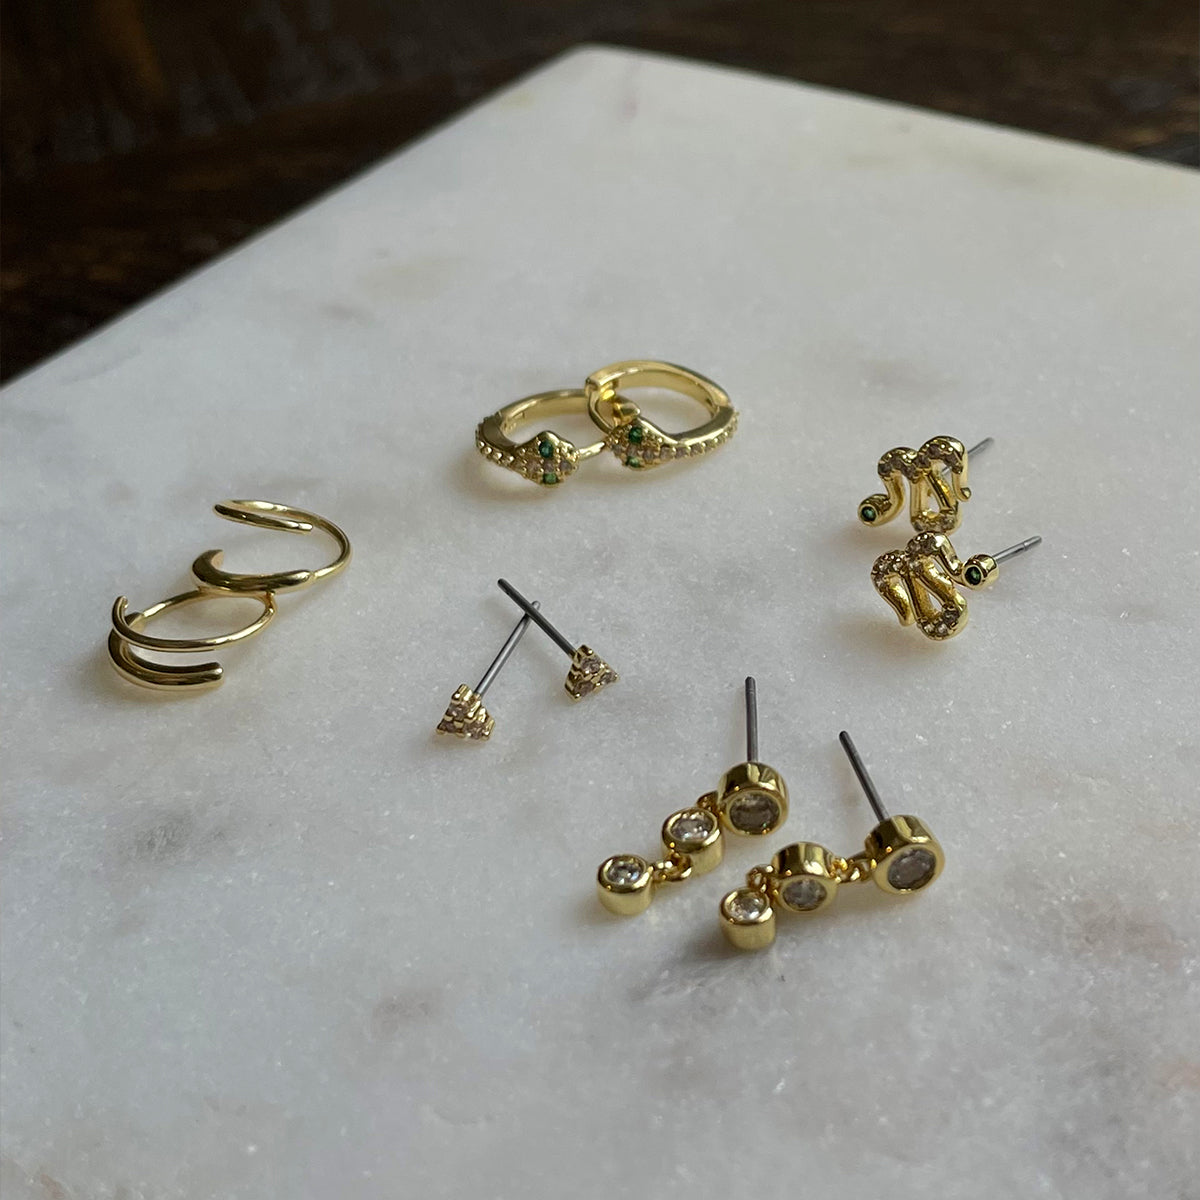 Why are my gold earrings doing discolored? : r/jewelry